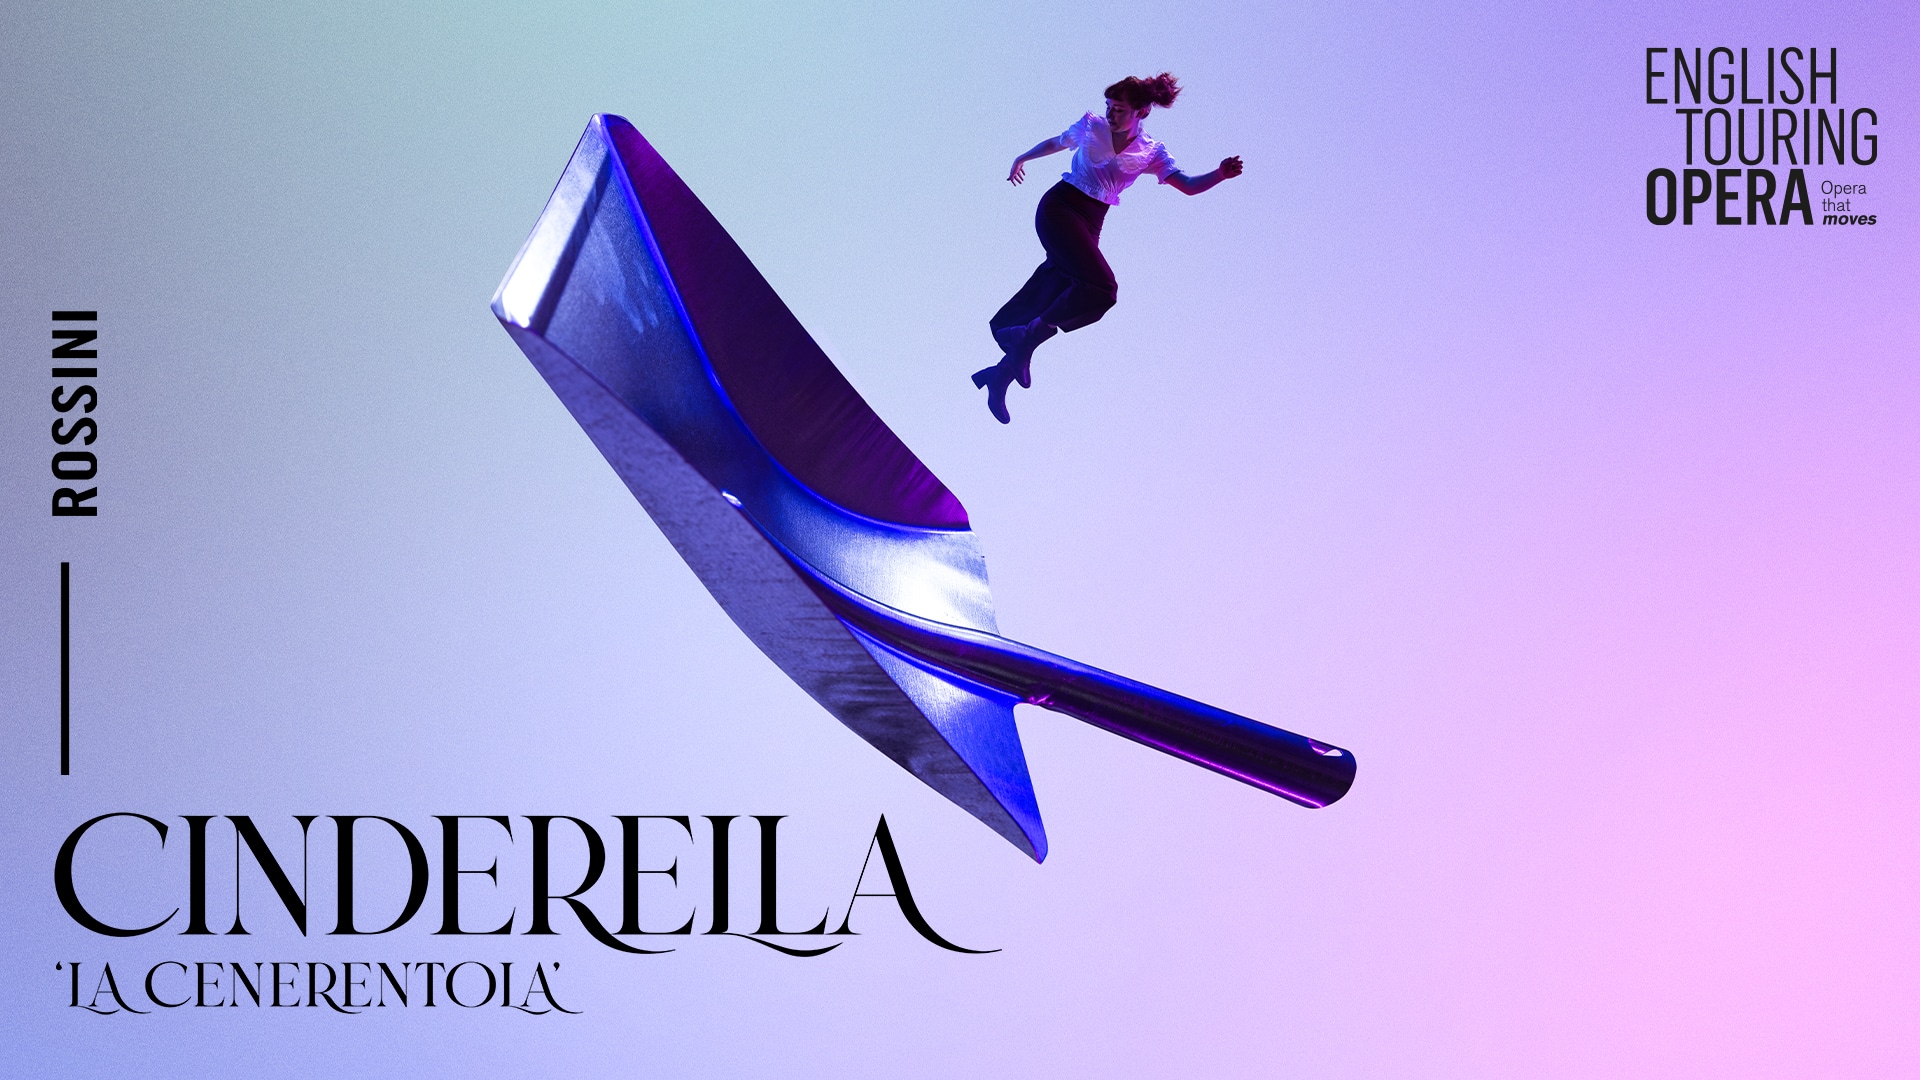 English Touring Opera Cinderella artwork. Blue and purple gradient background. A woman wearing a white top, black dress trousers and black boots jumps off a large metal cleaning pan that dwarfs her in scale. Text on the bottom left side of the image reads: 'Rossini. Cinderella. La Cenerentola'. Text at the top right corner of the image reads: 'English Touring Opera. Opera that moves.'